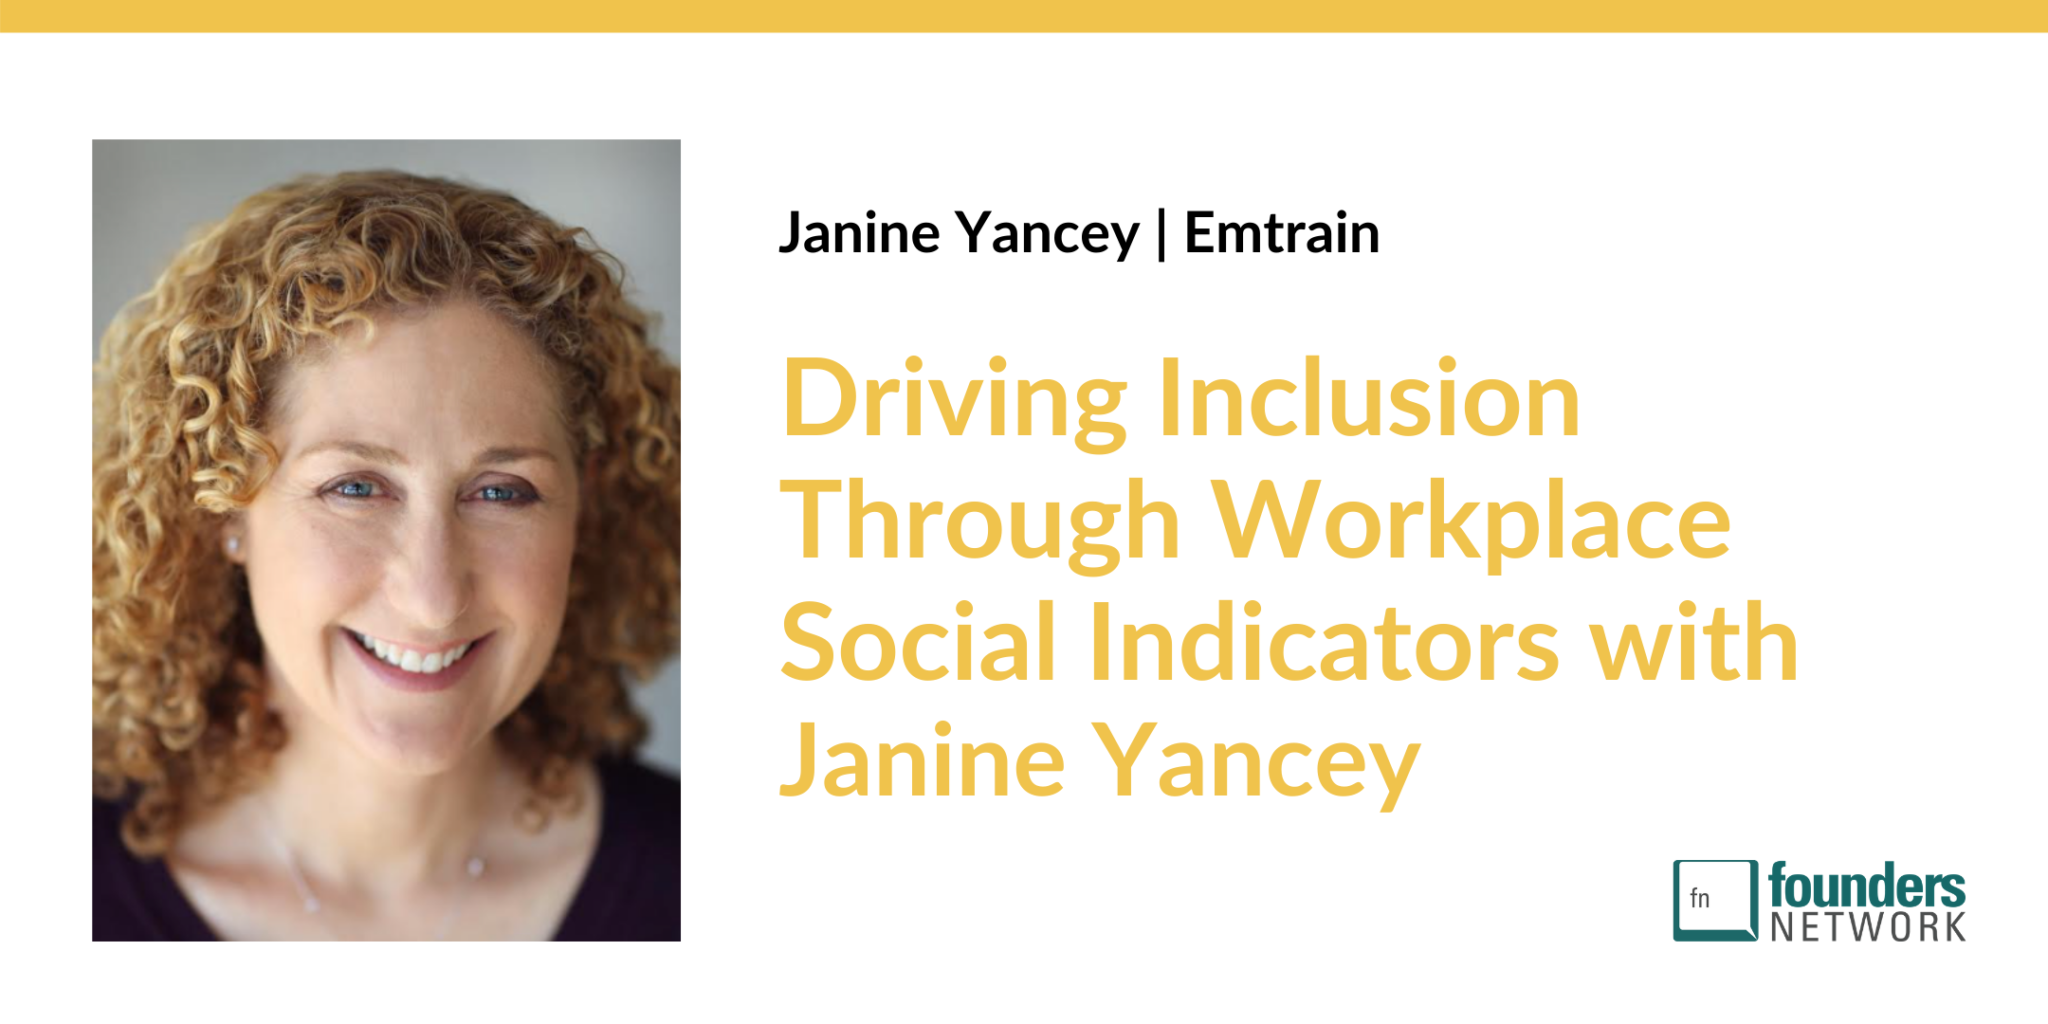 Driving Inclusion Through Workplace Social Indicators with Janine Yancey Eventbrite Header Image 2160px x 1080px